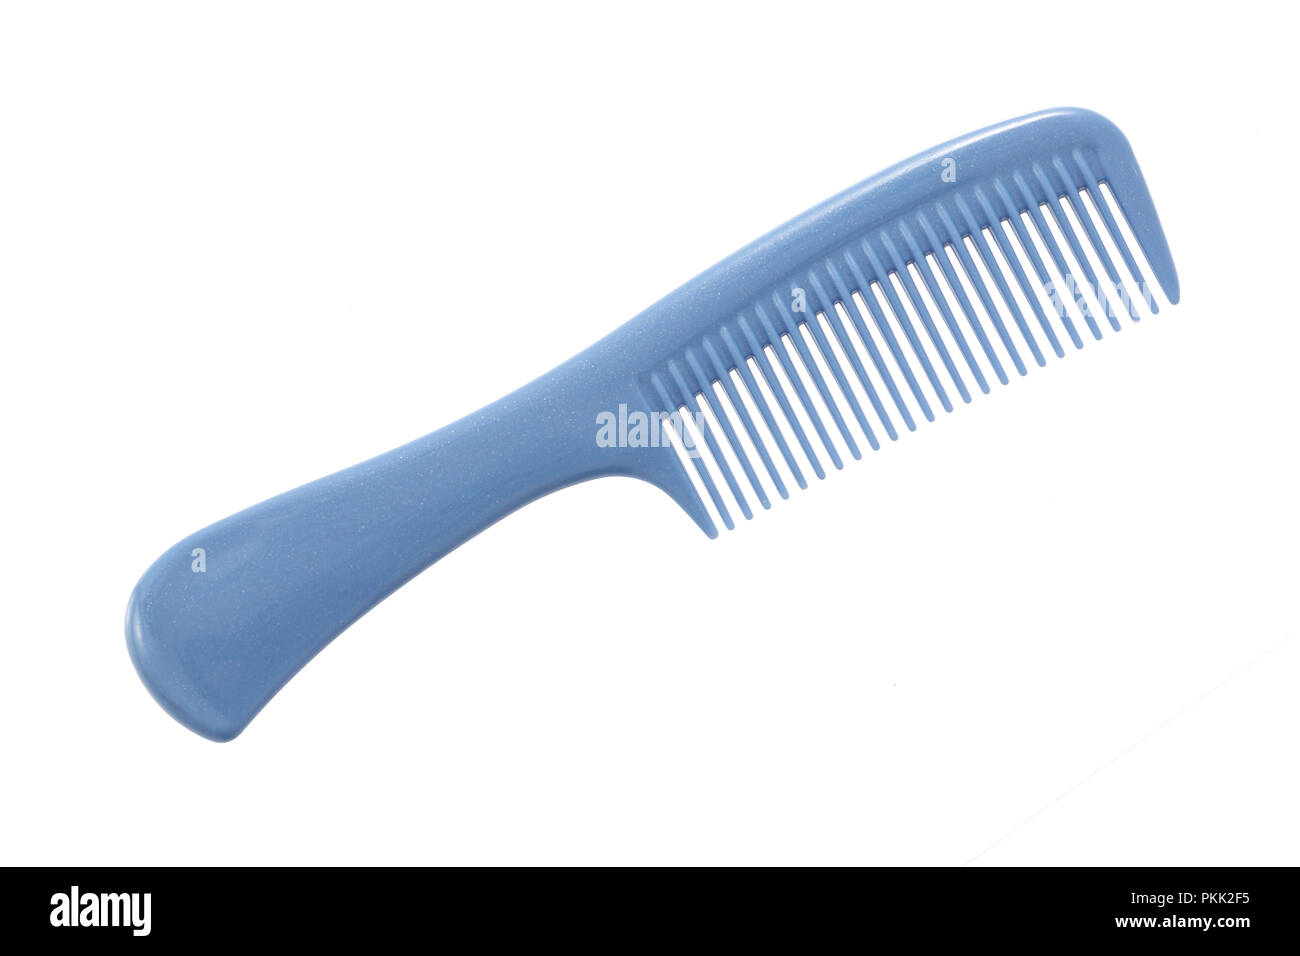 Blue Hair Comb Over: Tips and Tricks for Maintenance - wide 2